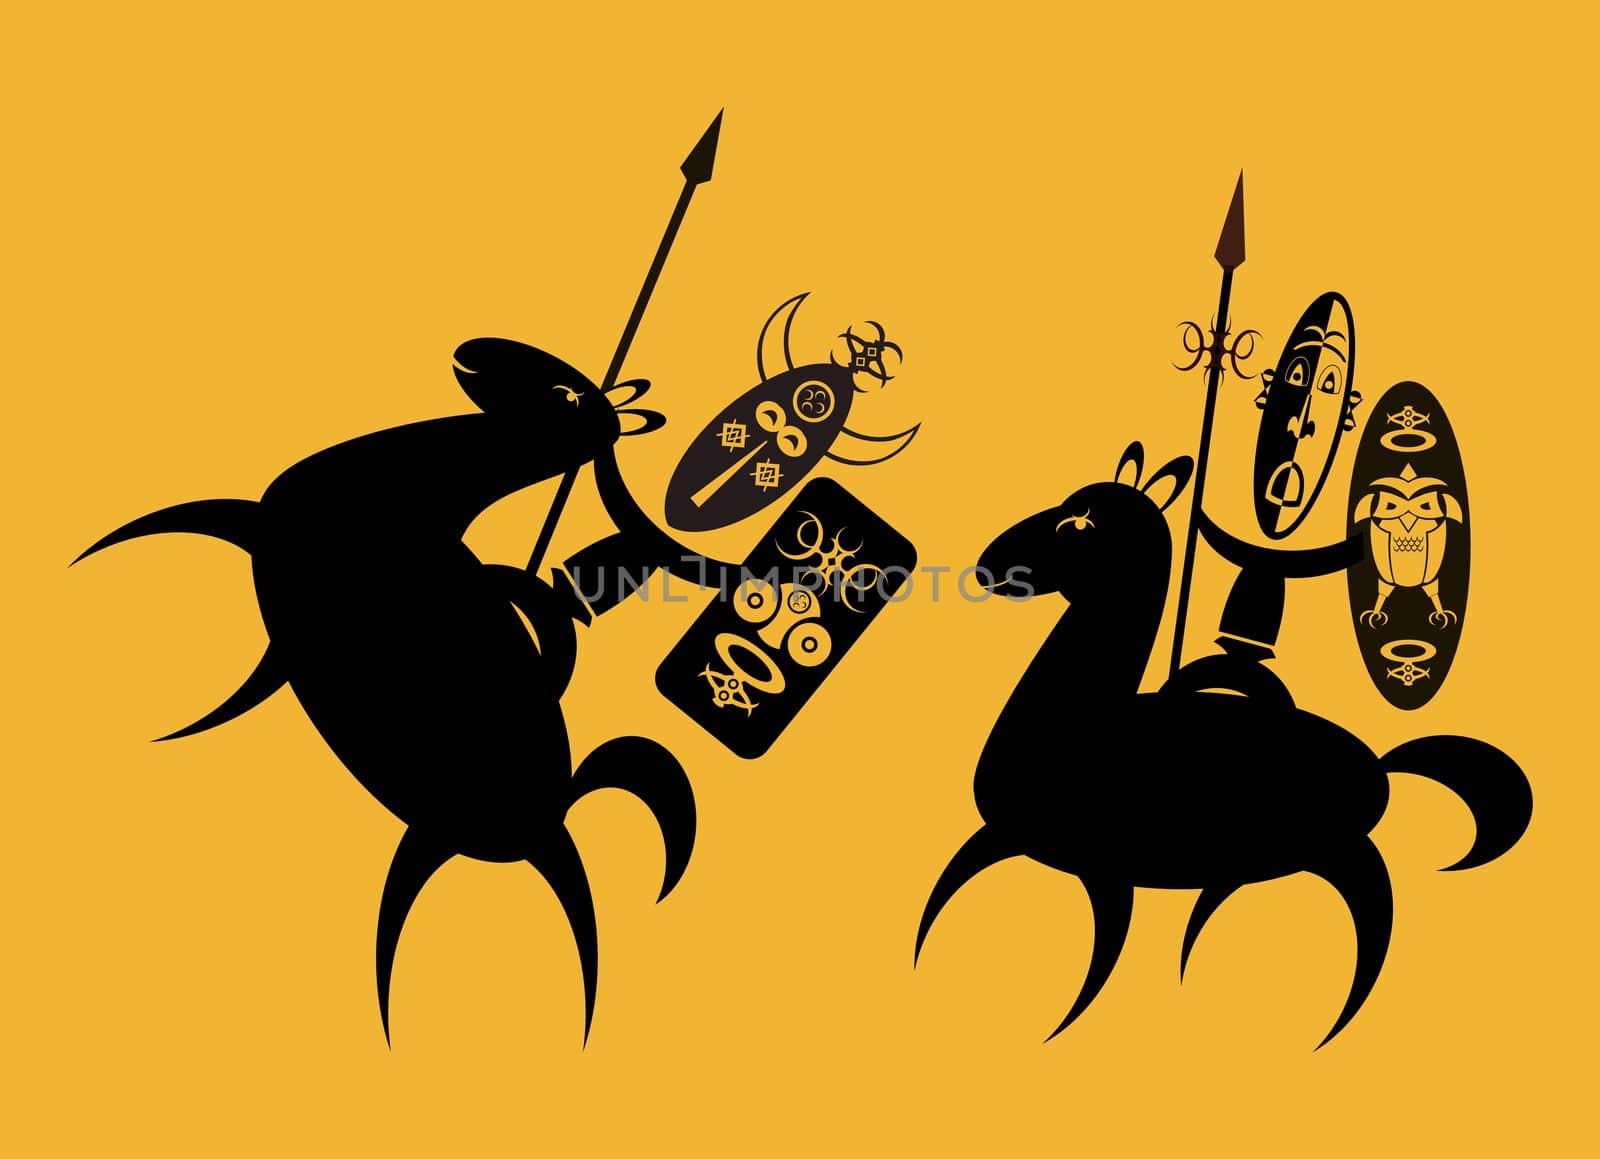 Illustration showing African warriors riding horses